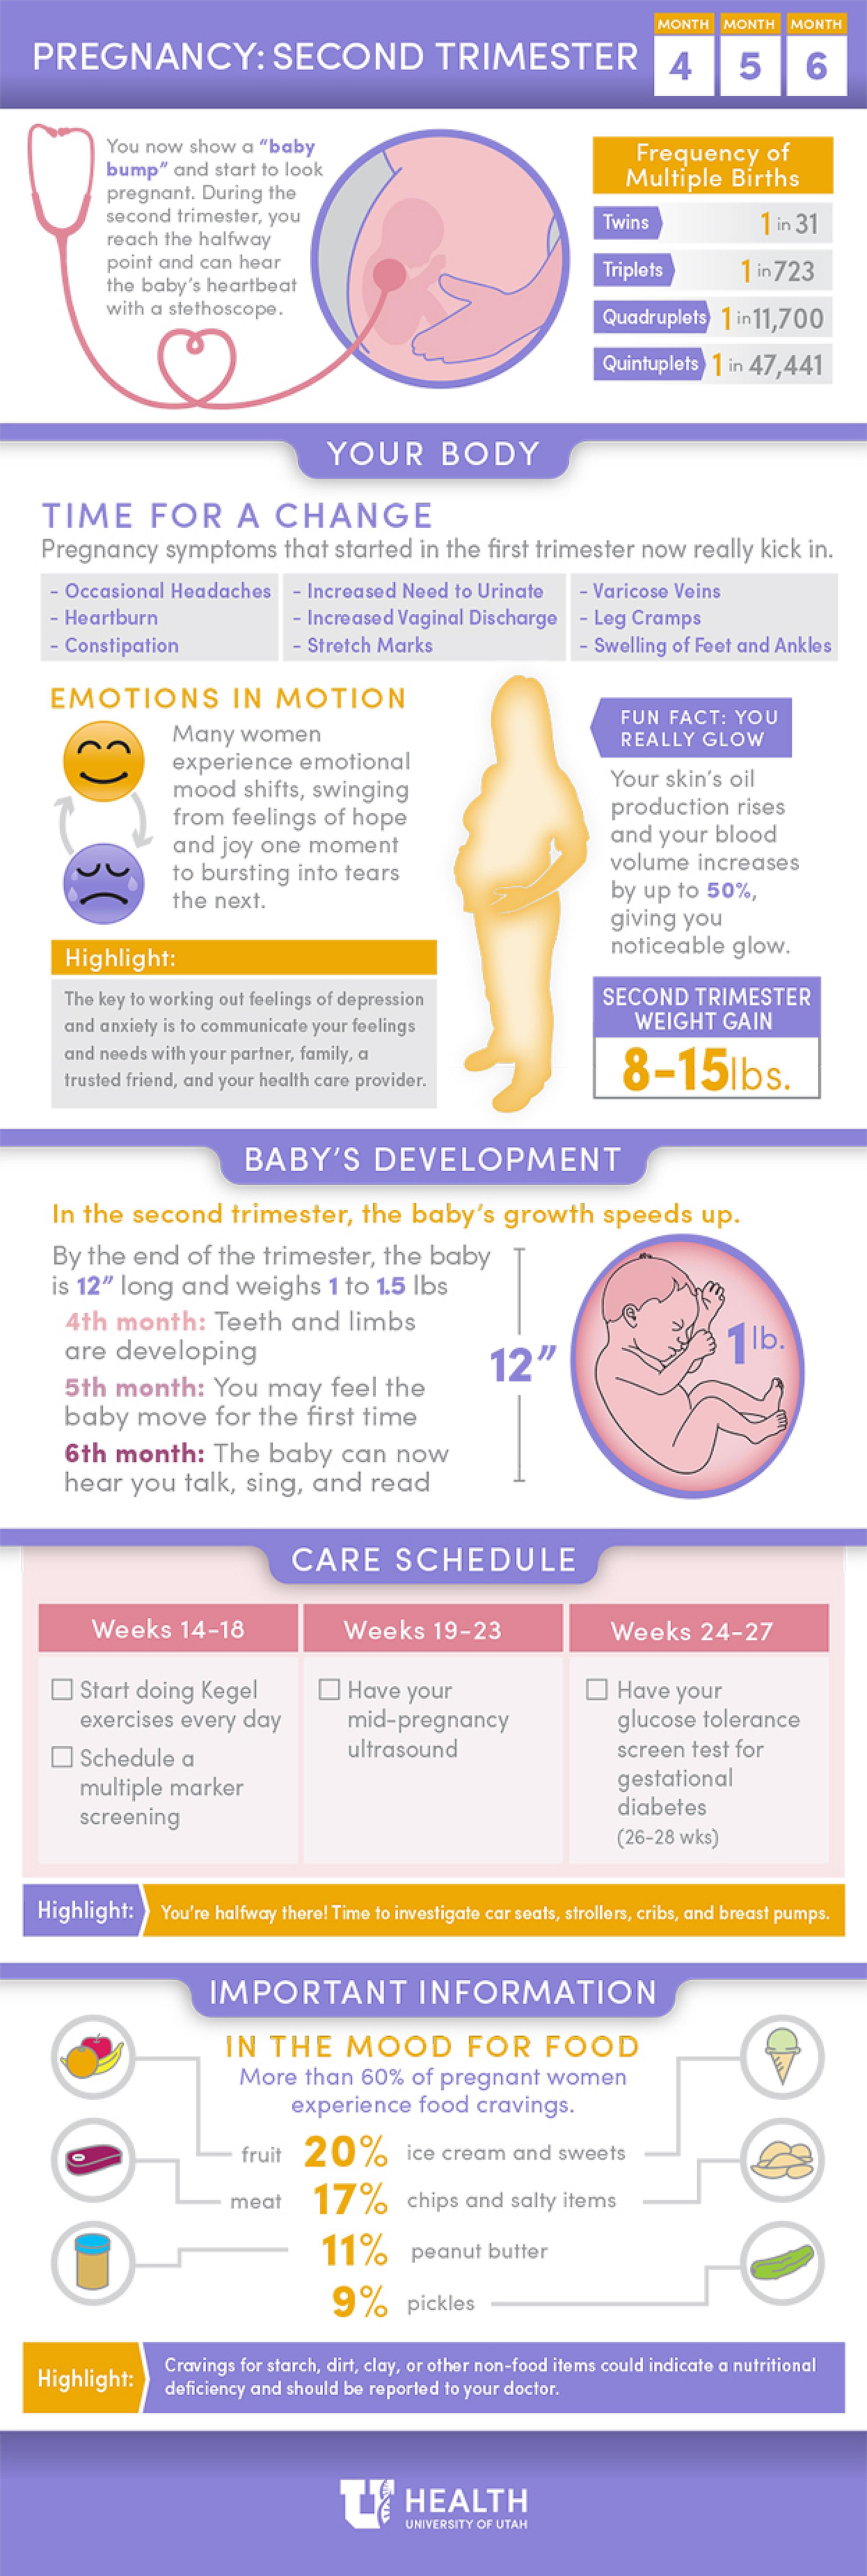 Women's Health Pregnancy 2nd Trimester Infographic